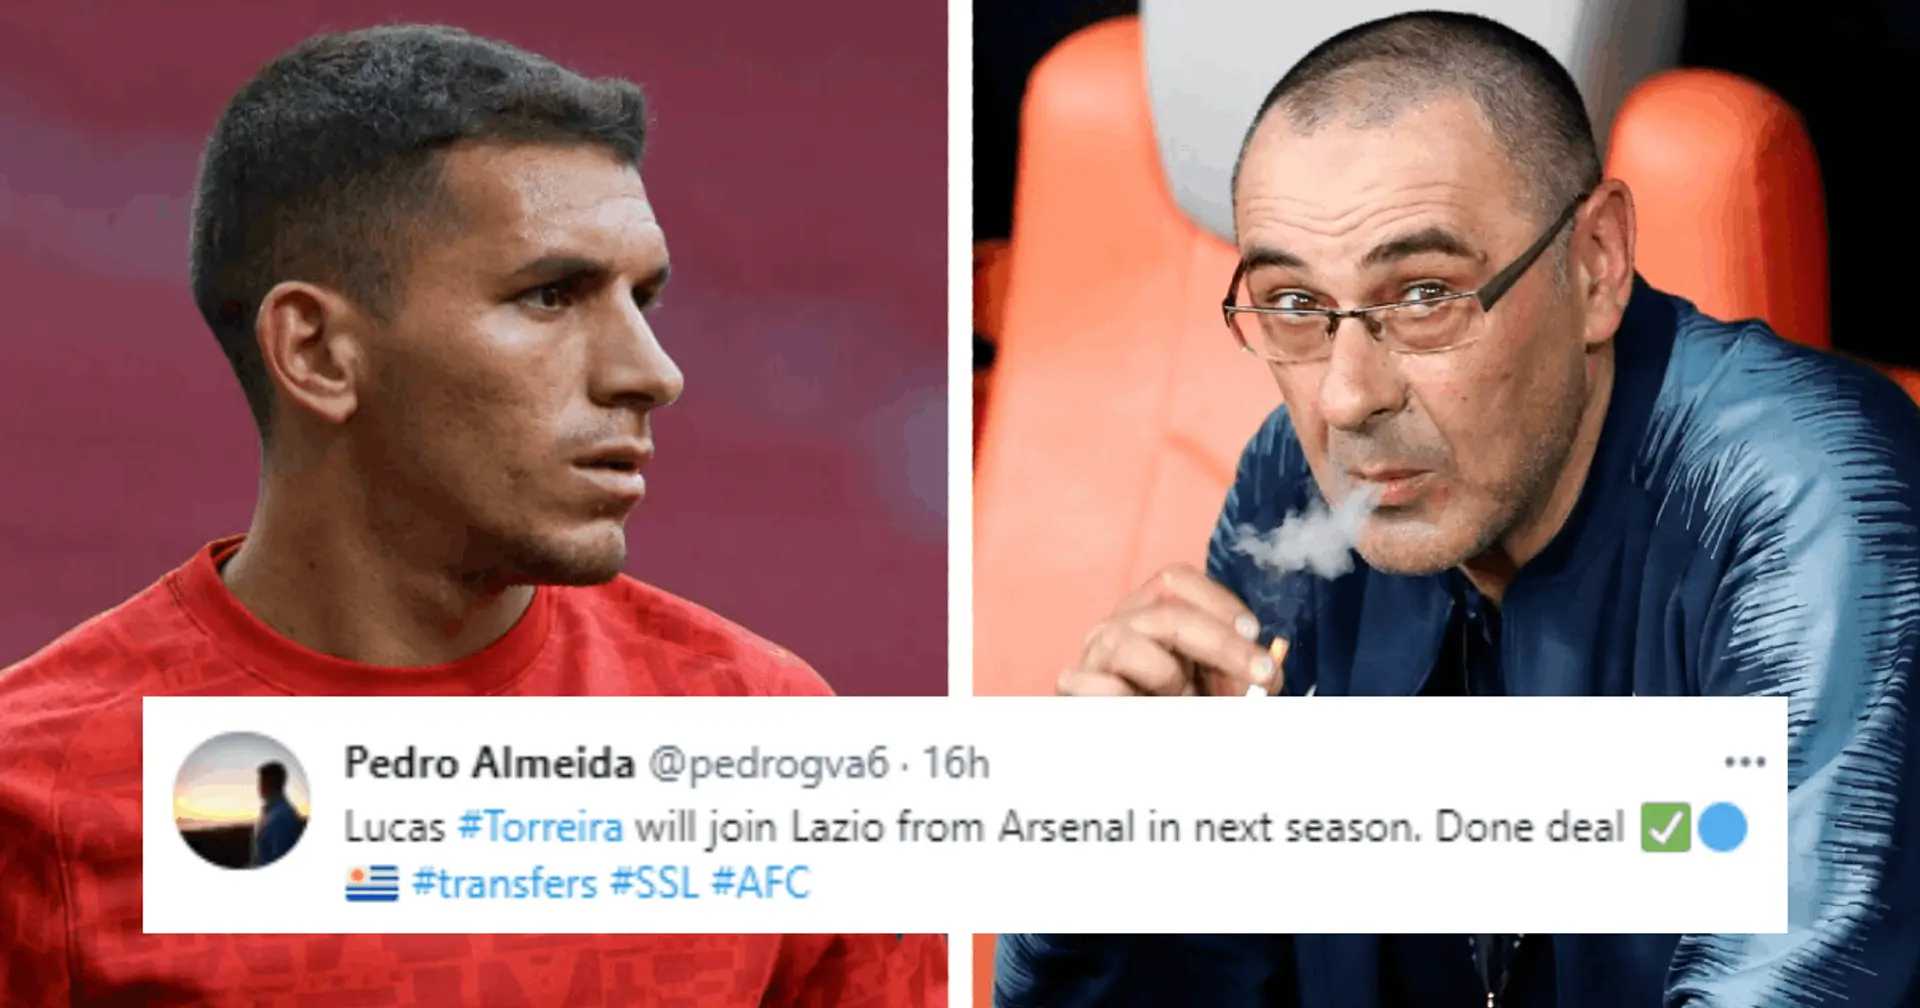 Lucas Torreira's move to Lazio reportedly a 'done deal', details revealed (reliability: 4 stars)